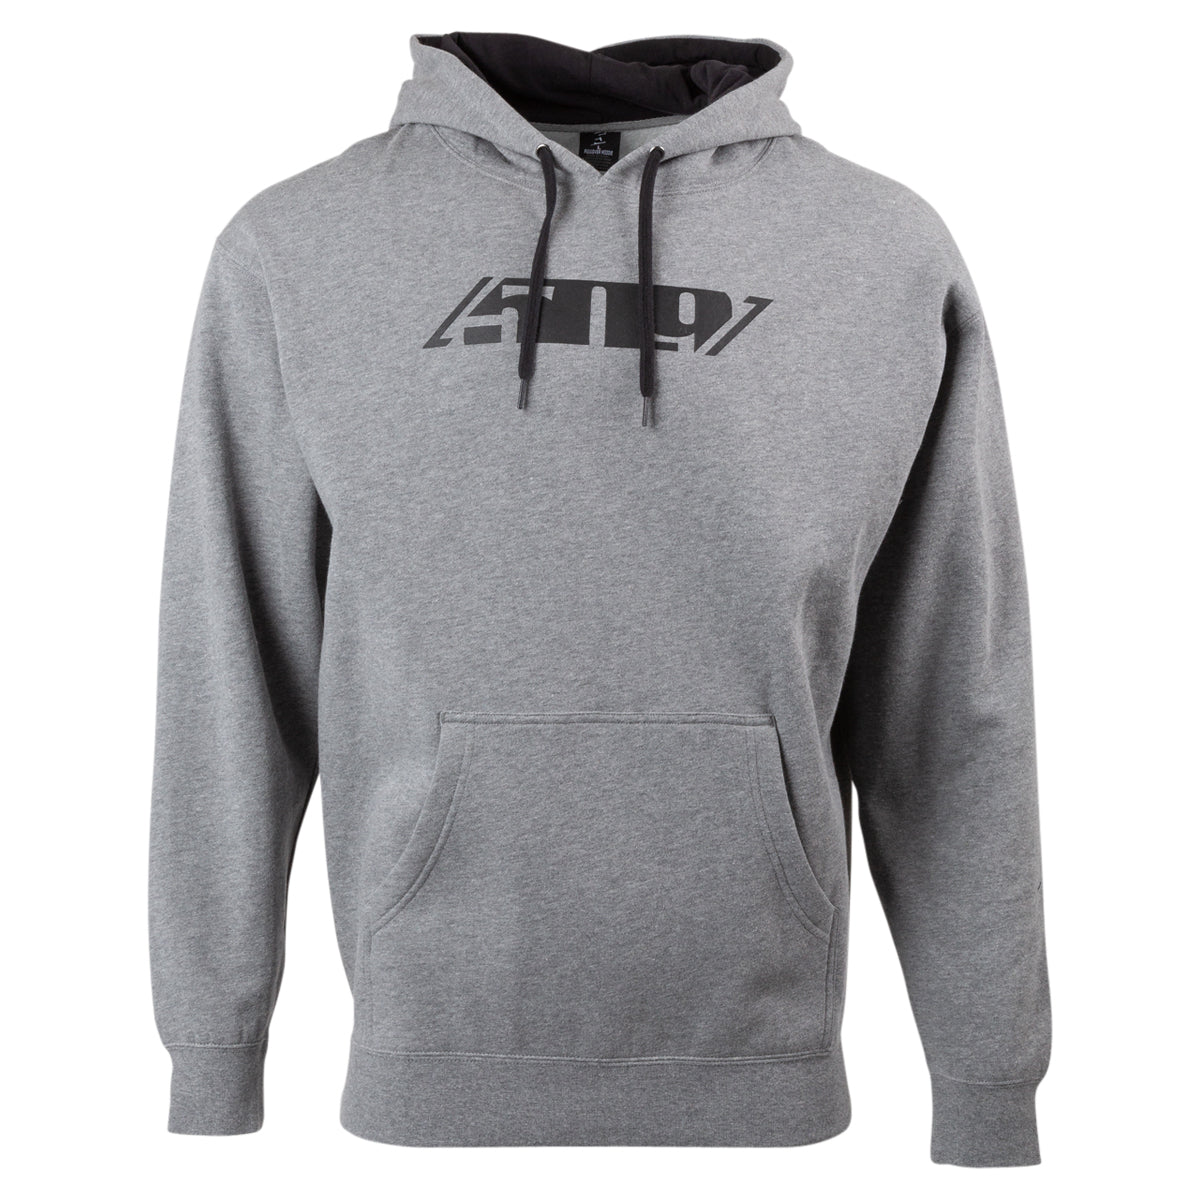 Legacy Pullover Hoodie - F09004900 - The Parts Lodge